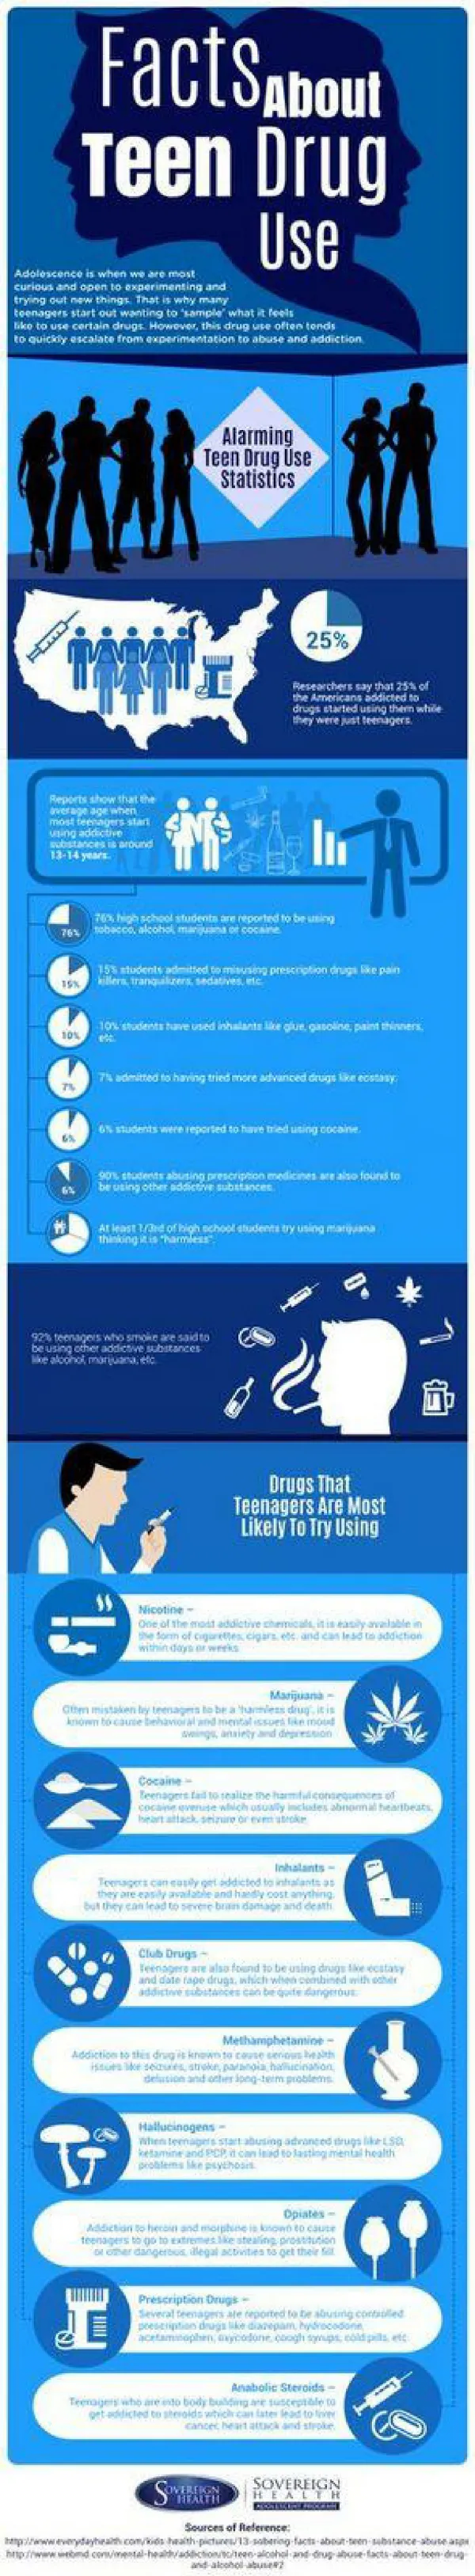 Facts About Teen Drug Use